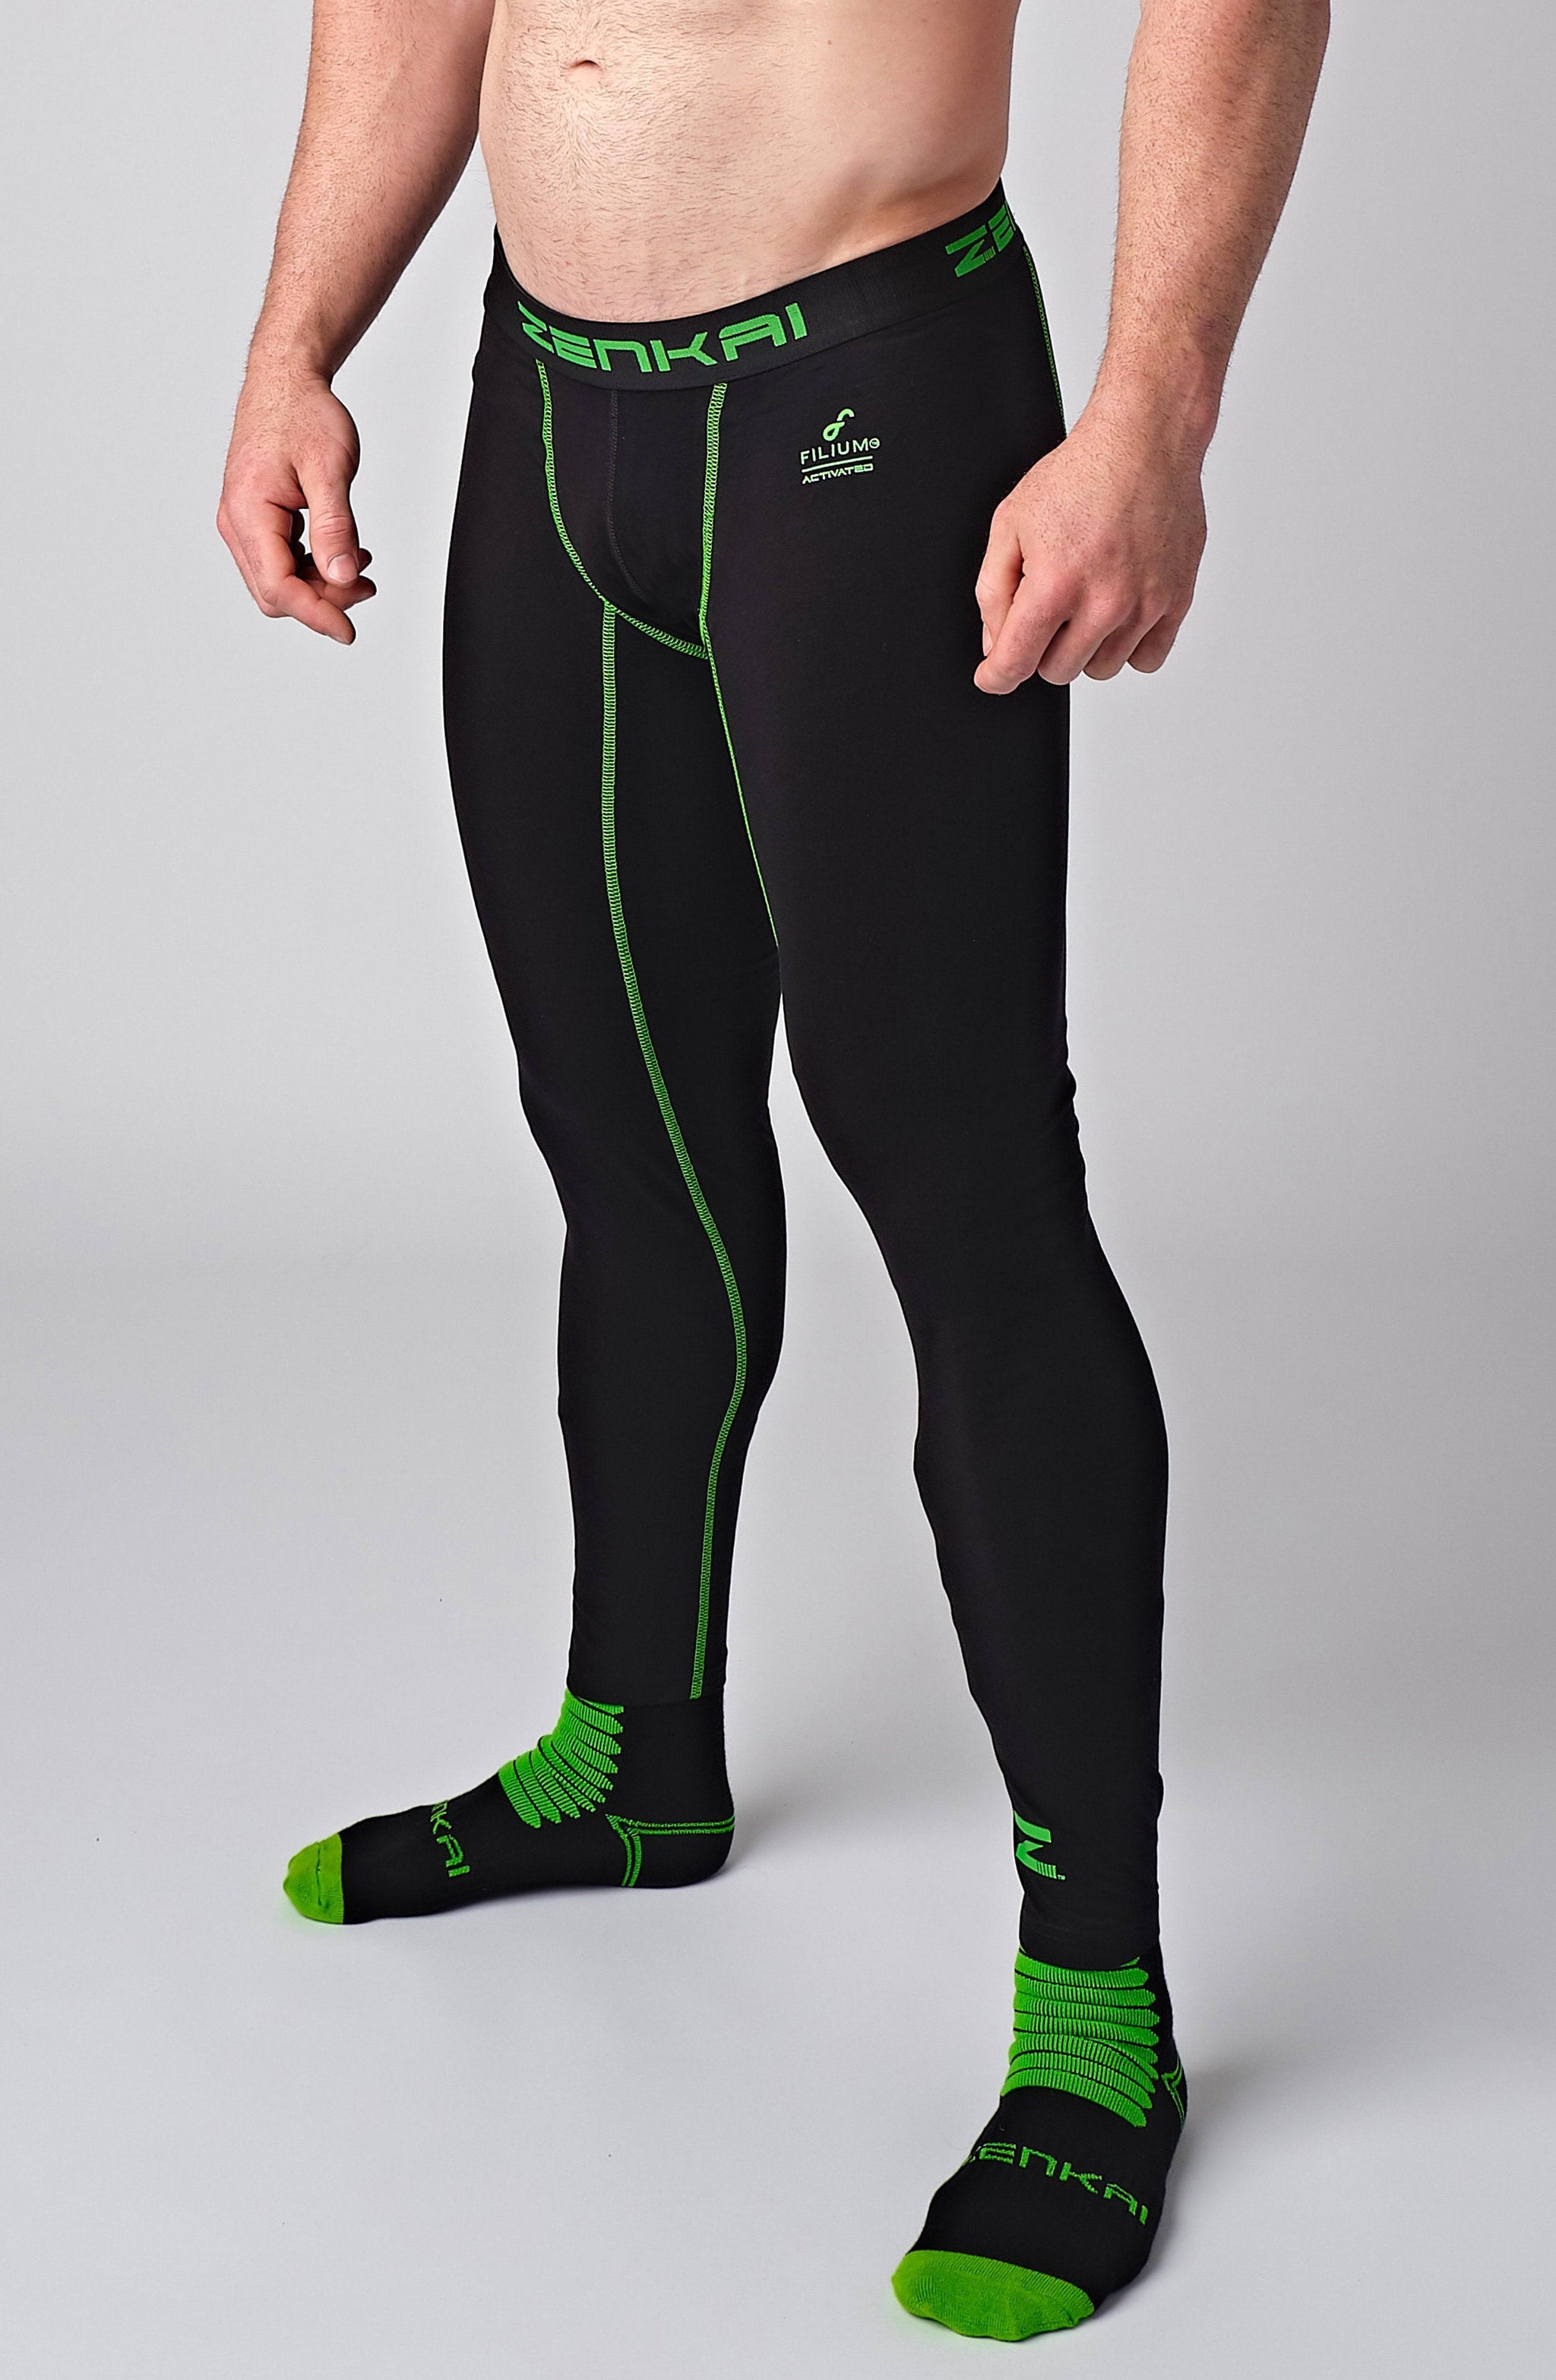 What you need to know about compression tights